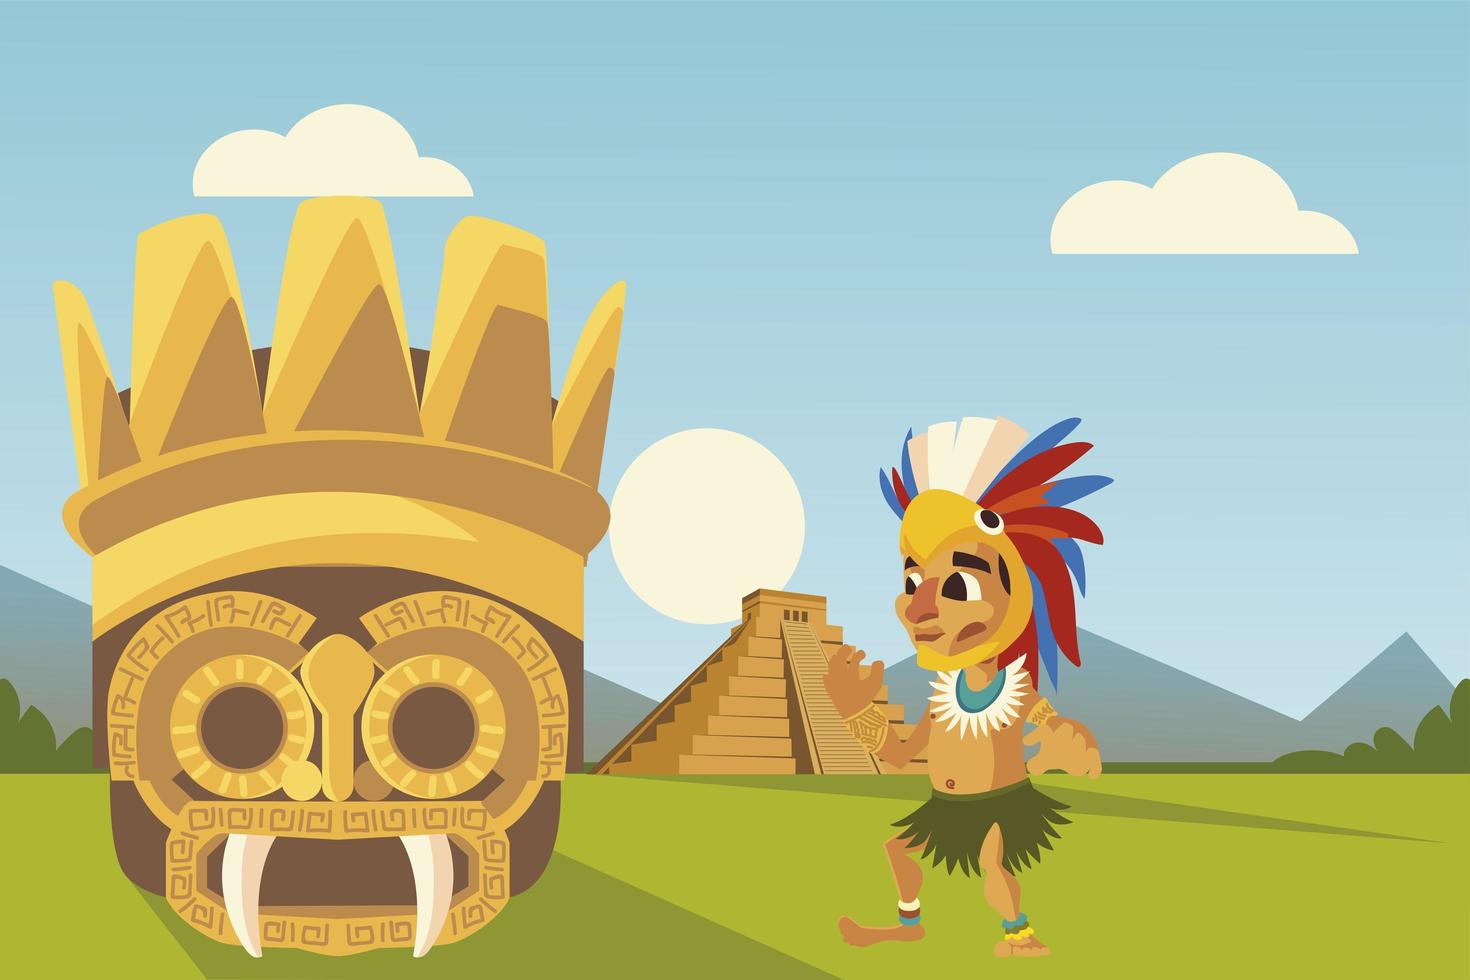 aztec culture warrior mask and pyramid in landscape vector